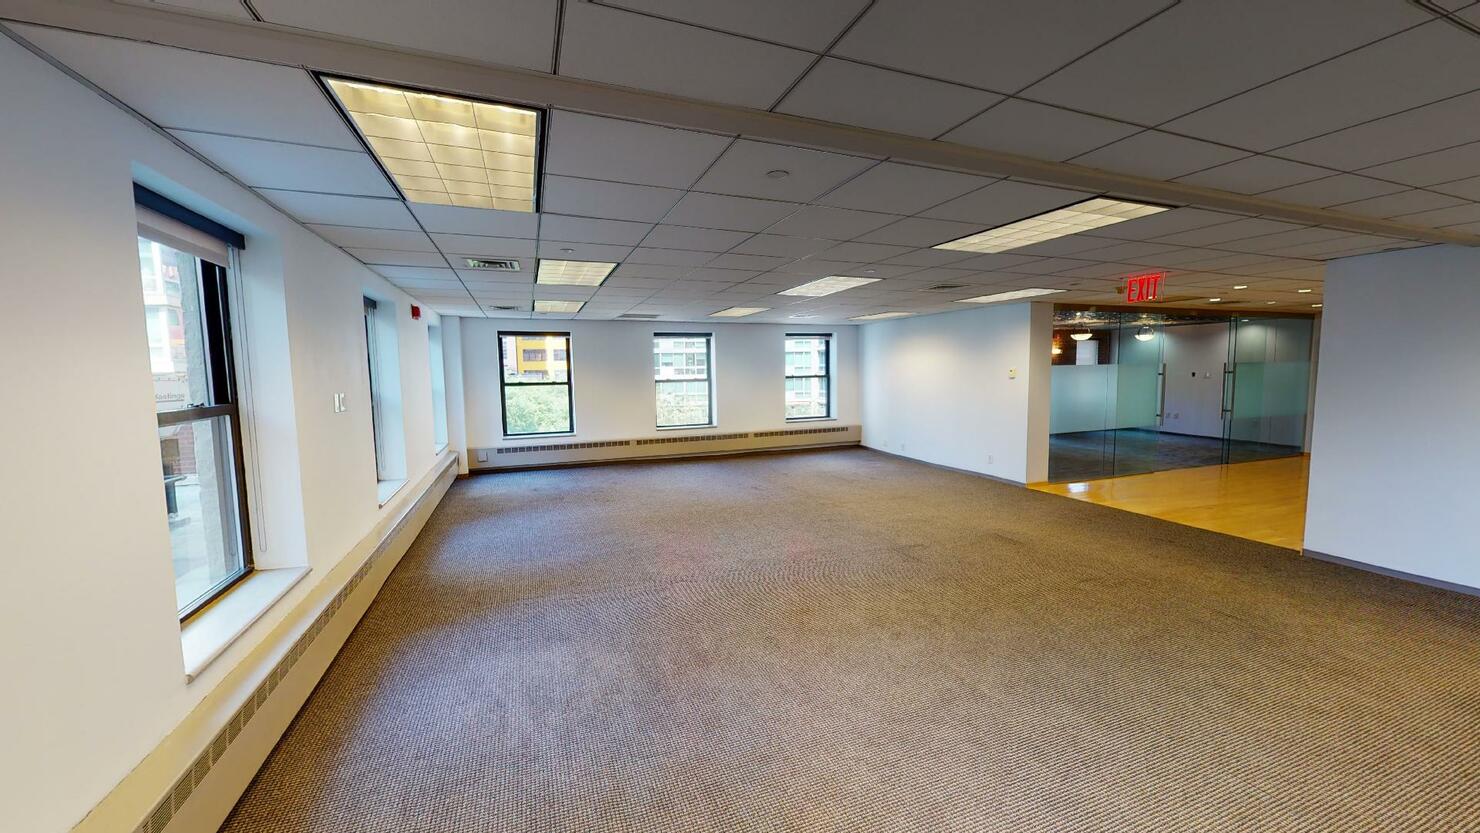 Bright corner office space for lease on 483 10th Avenue near Hudson Yards, New York City.